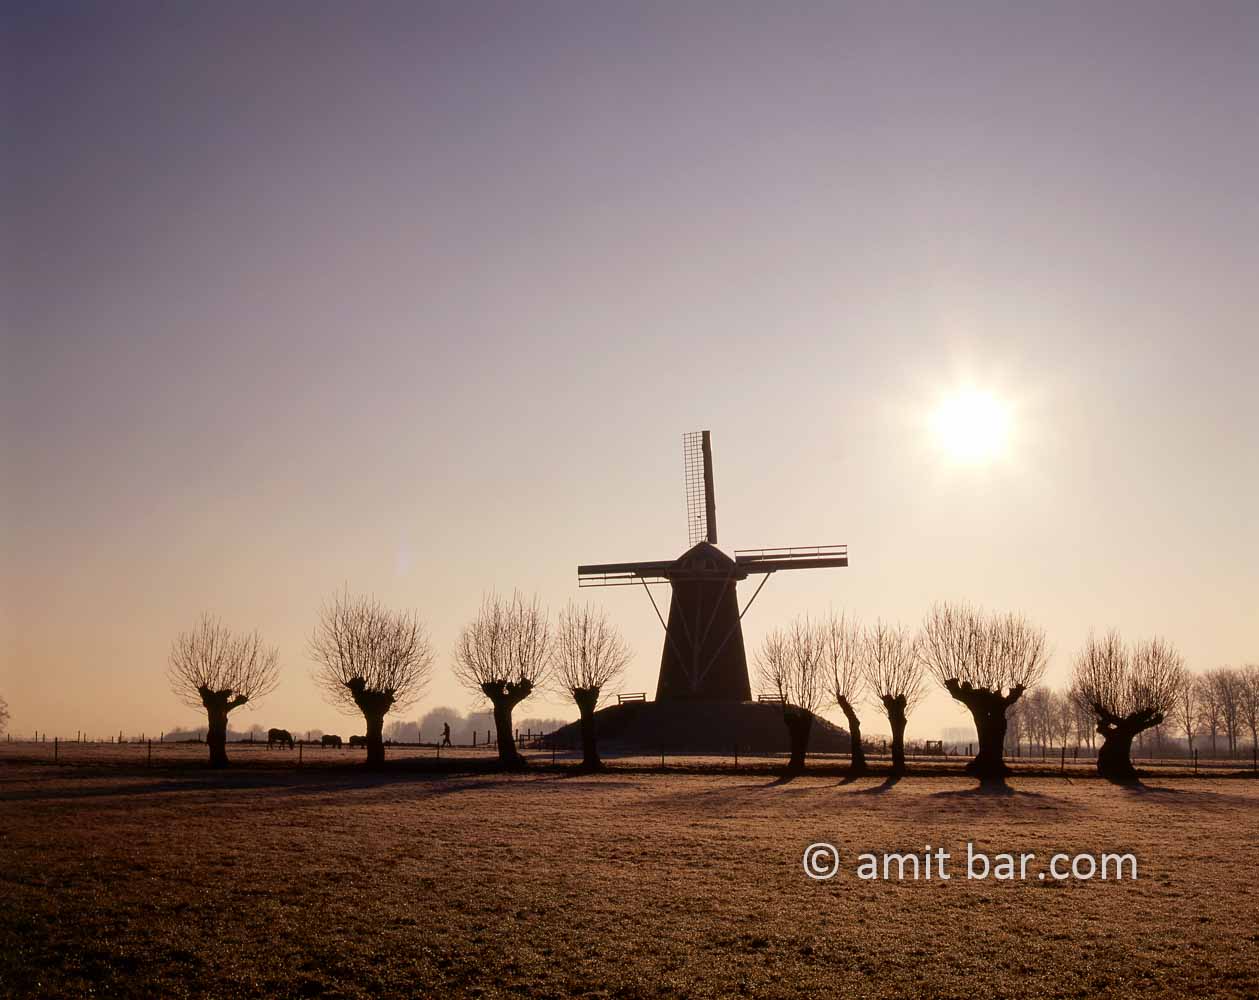 Windmill with willows: Windmill at Bronckhorst, The Netherlands